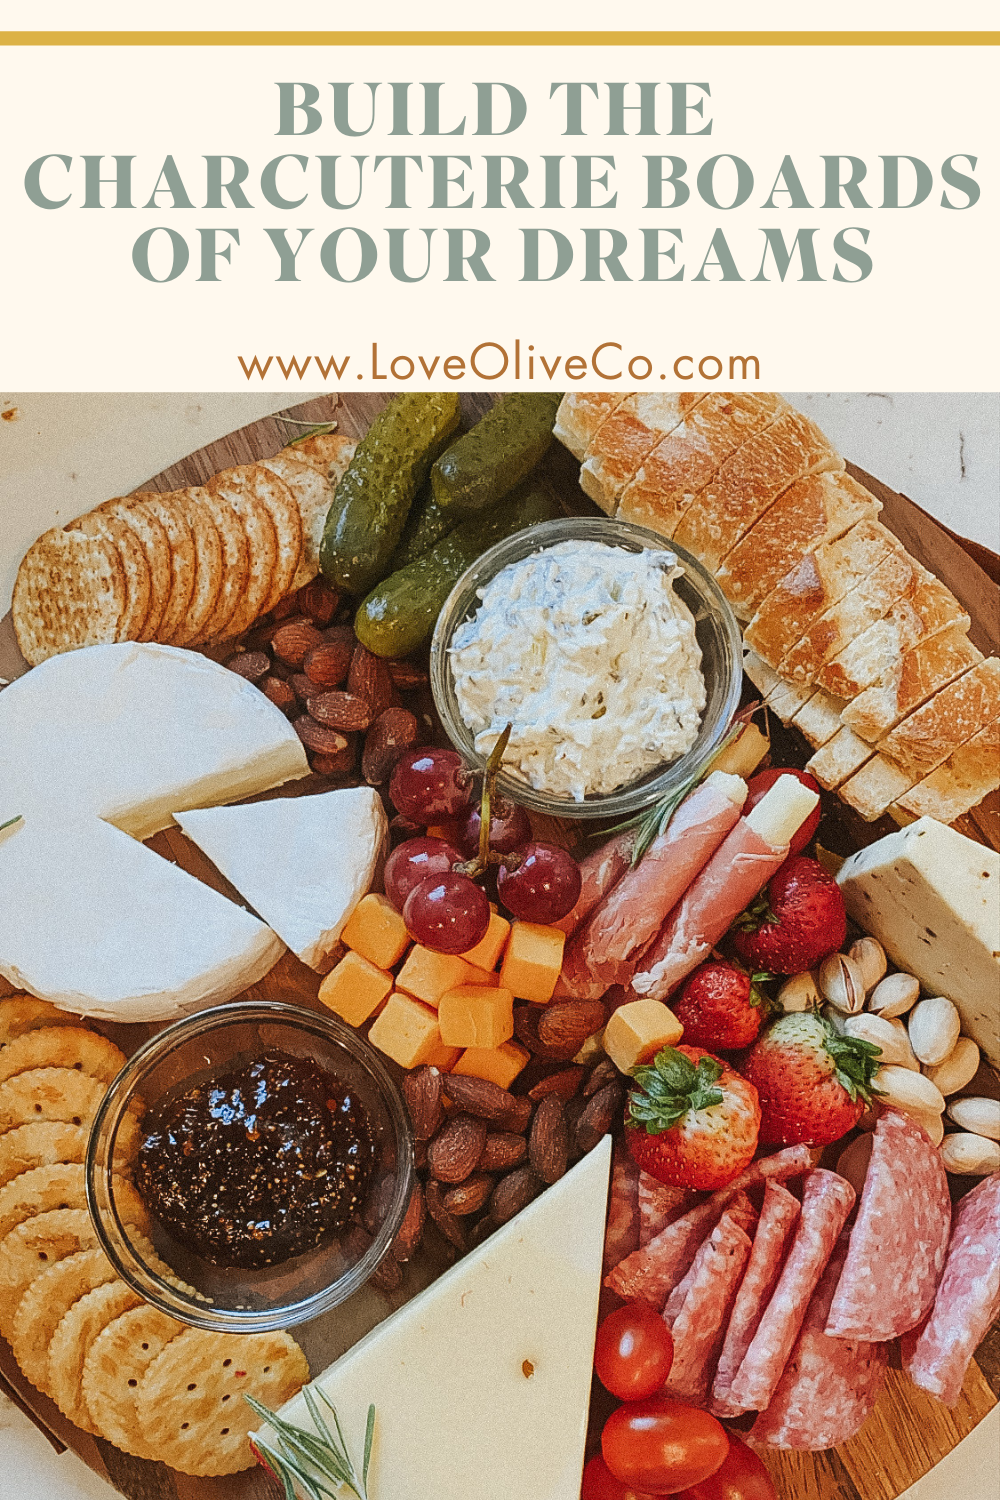 Build the Charcuterie Board of Your Dreams www.loveoliveco.com